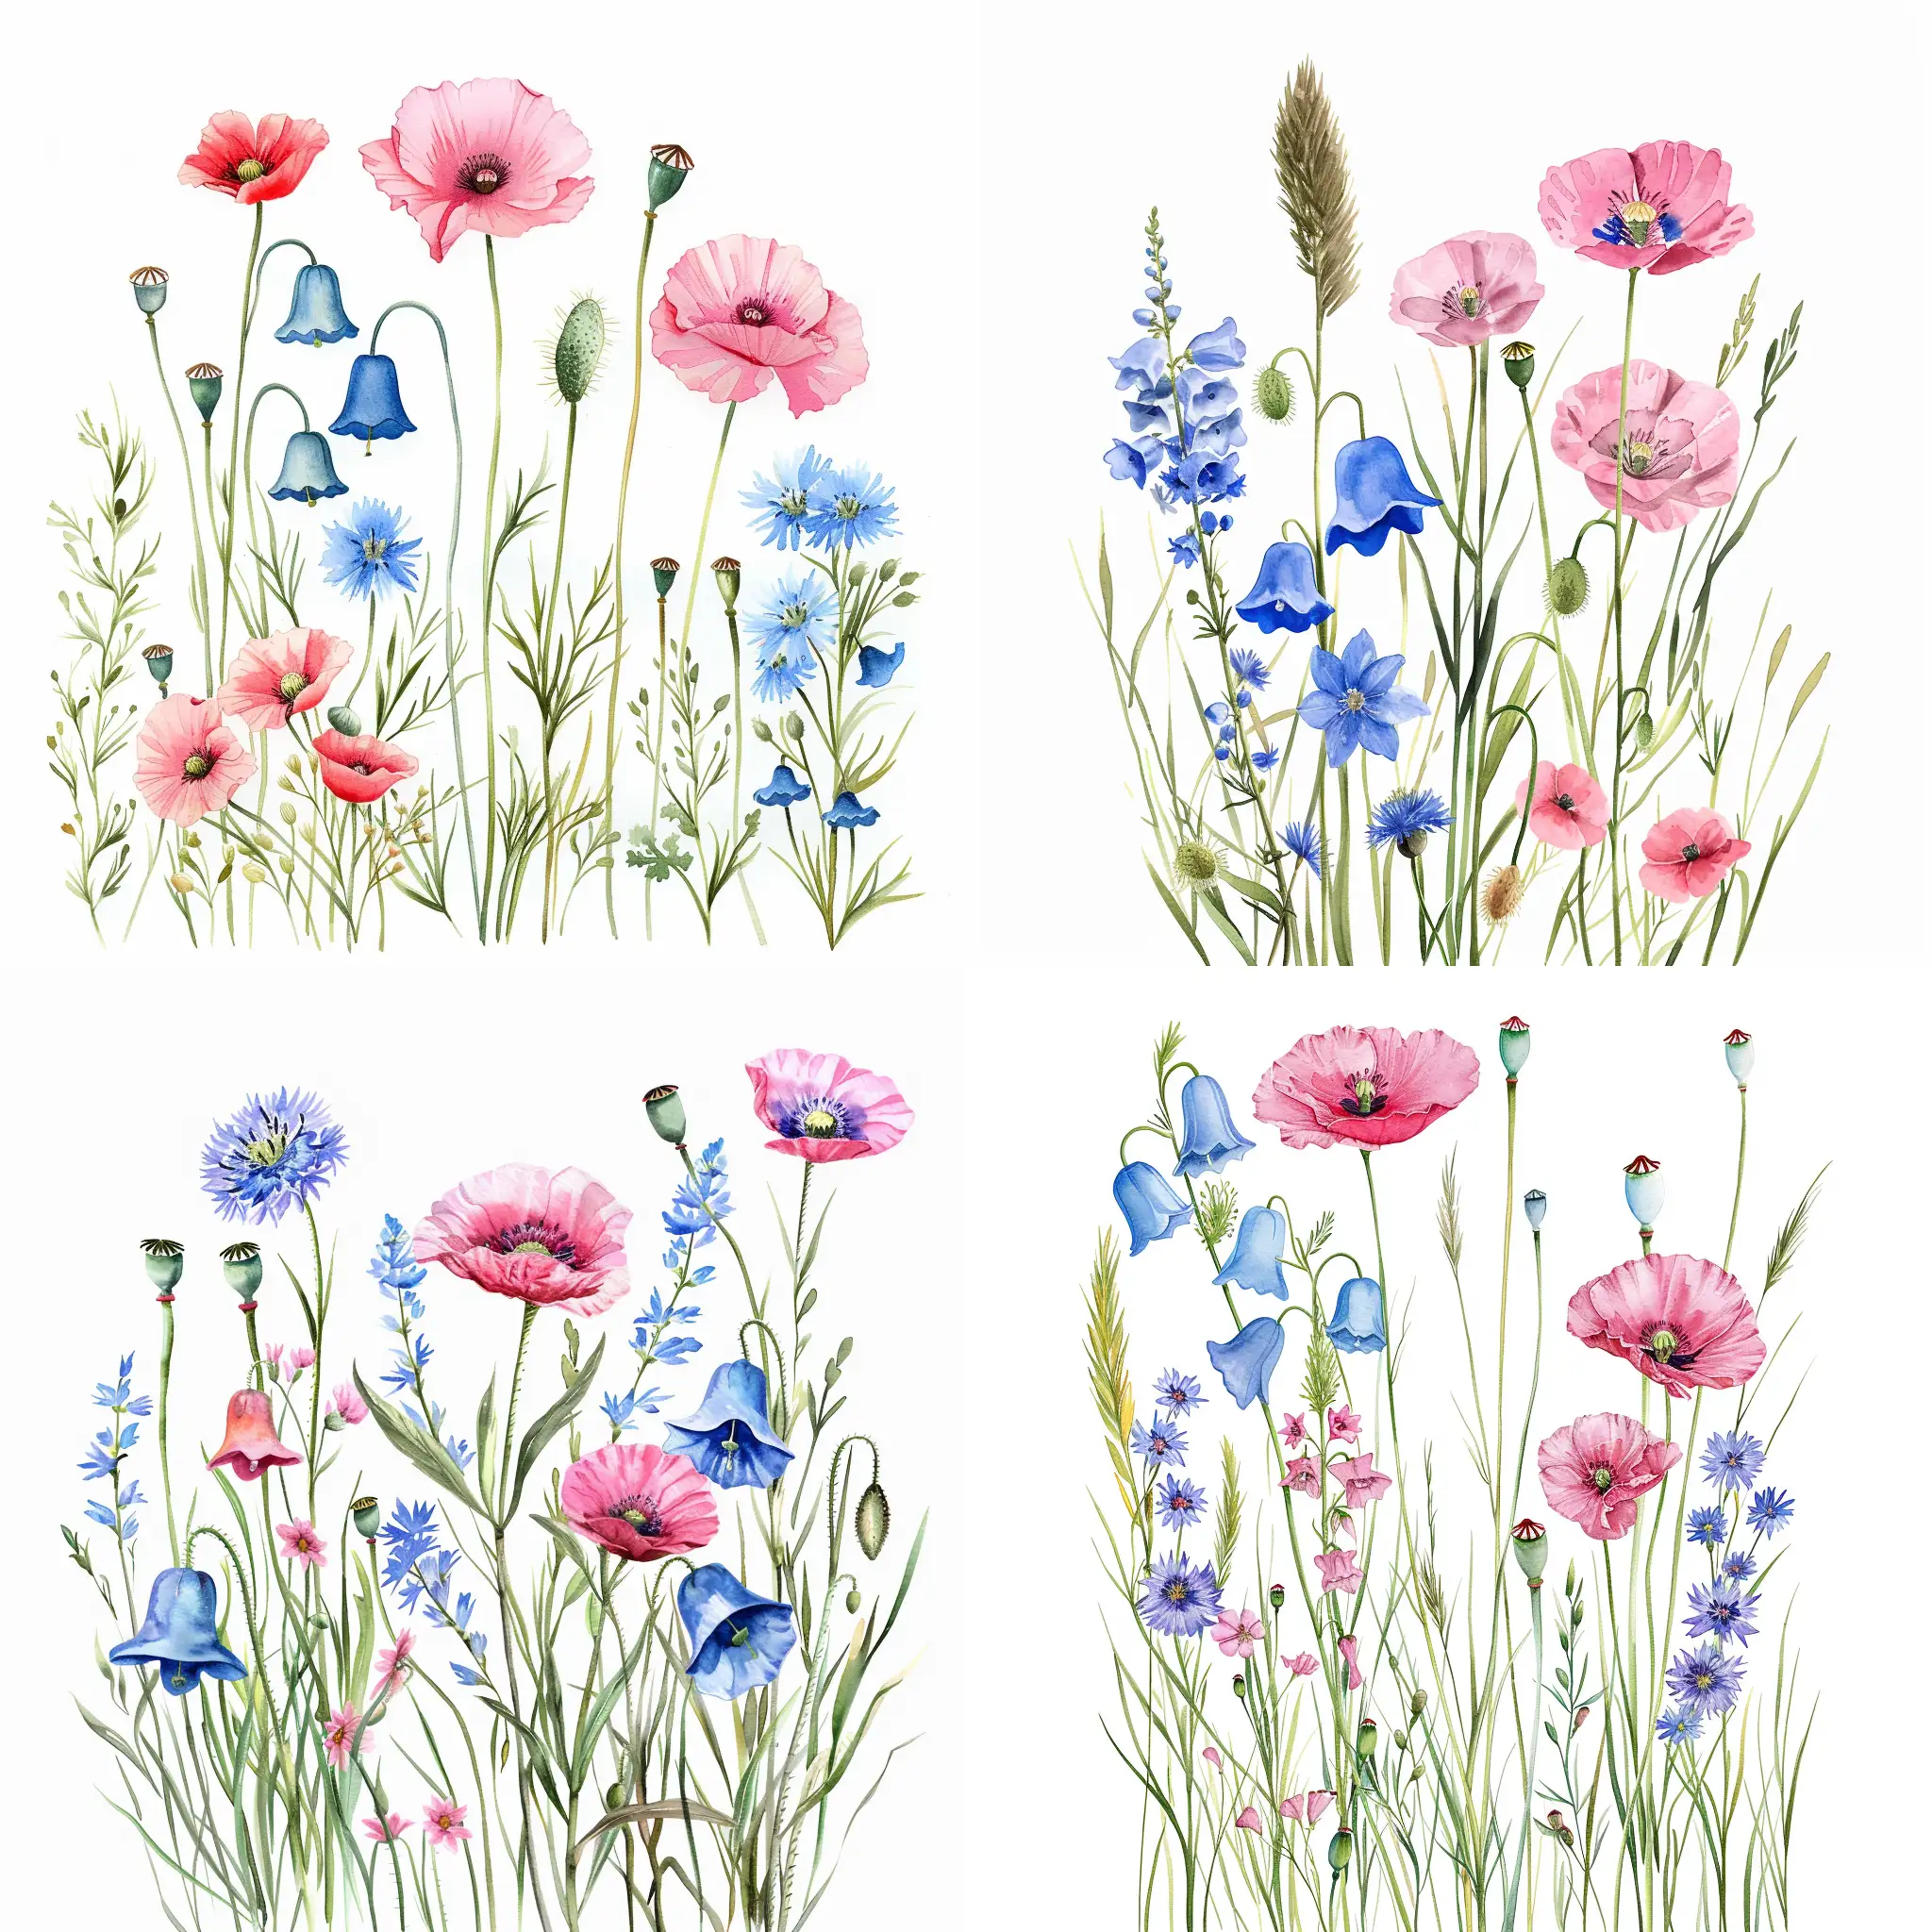 Handpainted-Watercolor-Wildflower-Bouquet-Bellflowers-Cornflowers-and-Pink-Poppy-on-White-Background